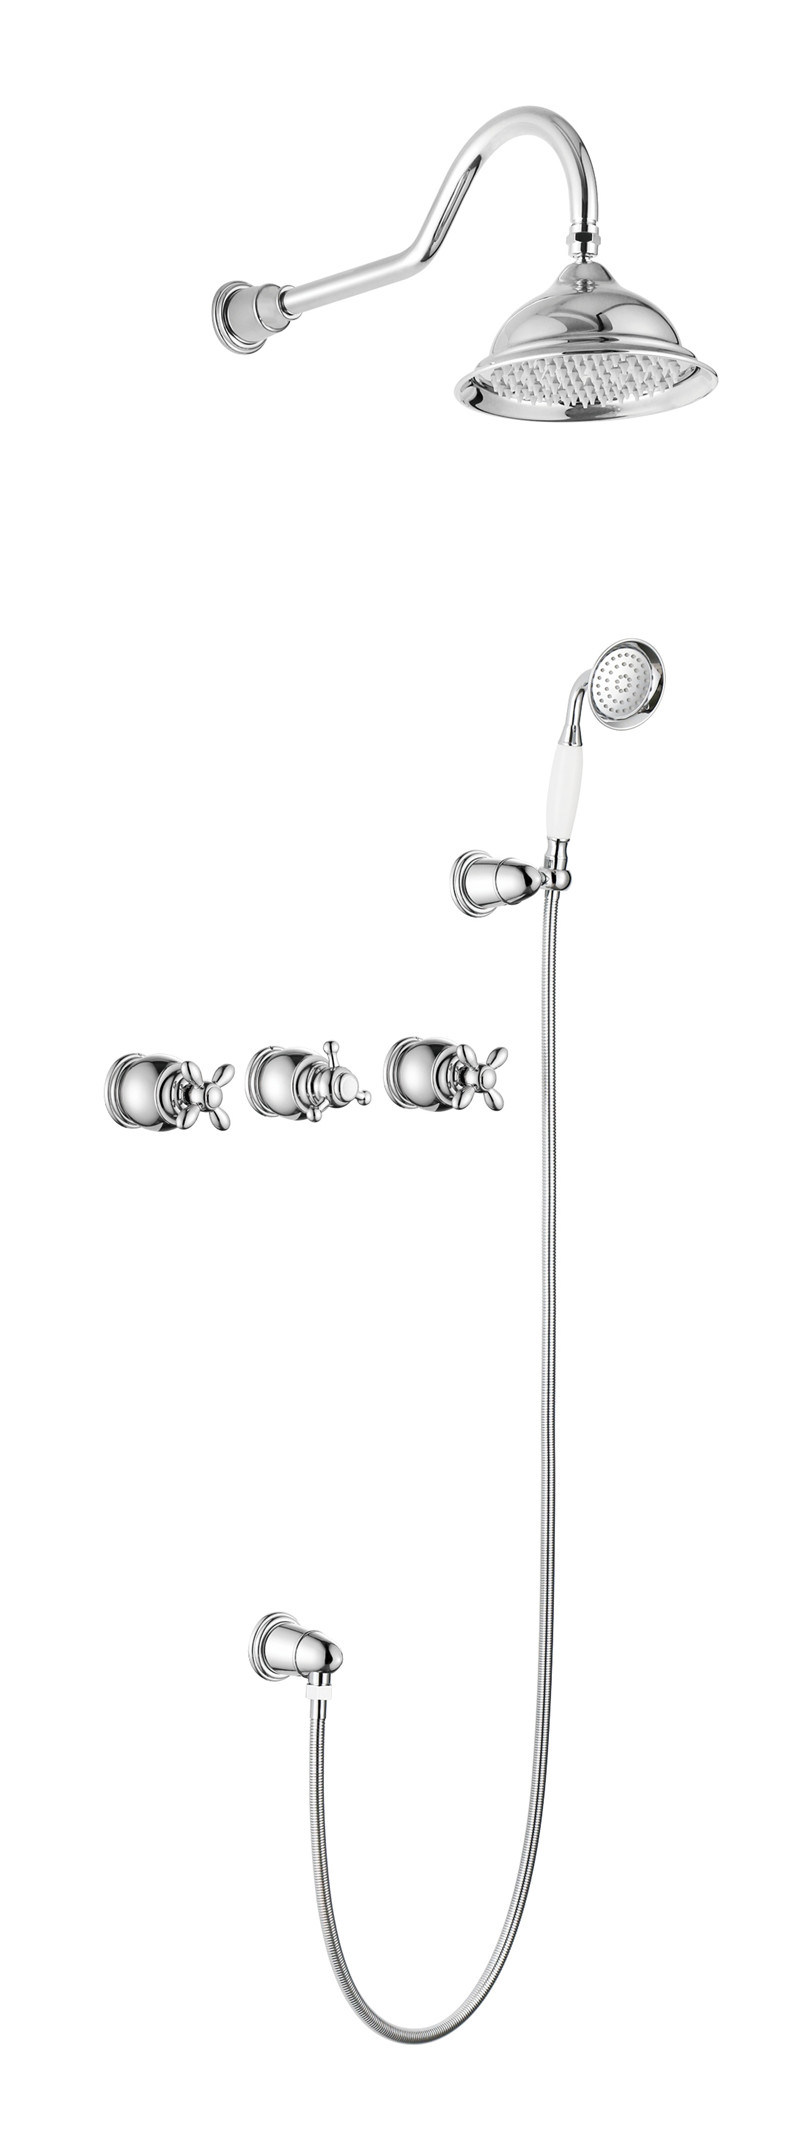 Wall Mounted Antique Brass Concealed Shower Set (zf-W74)